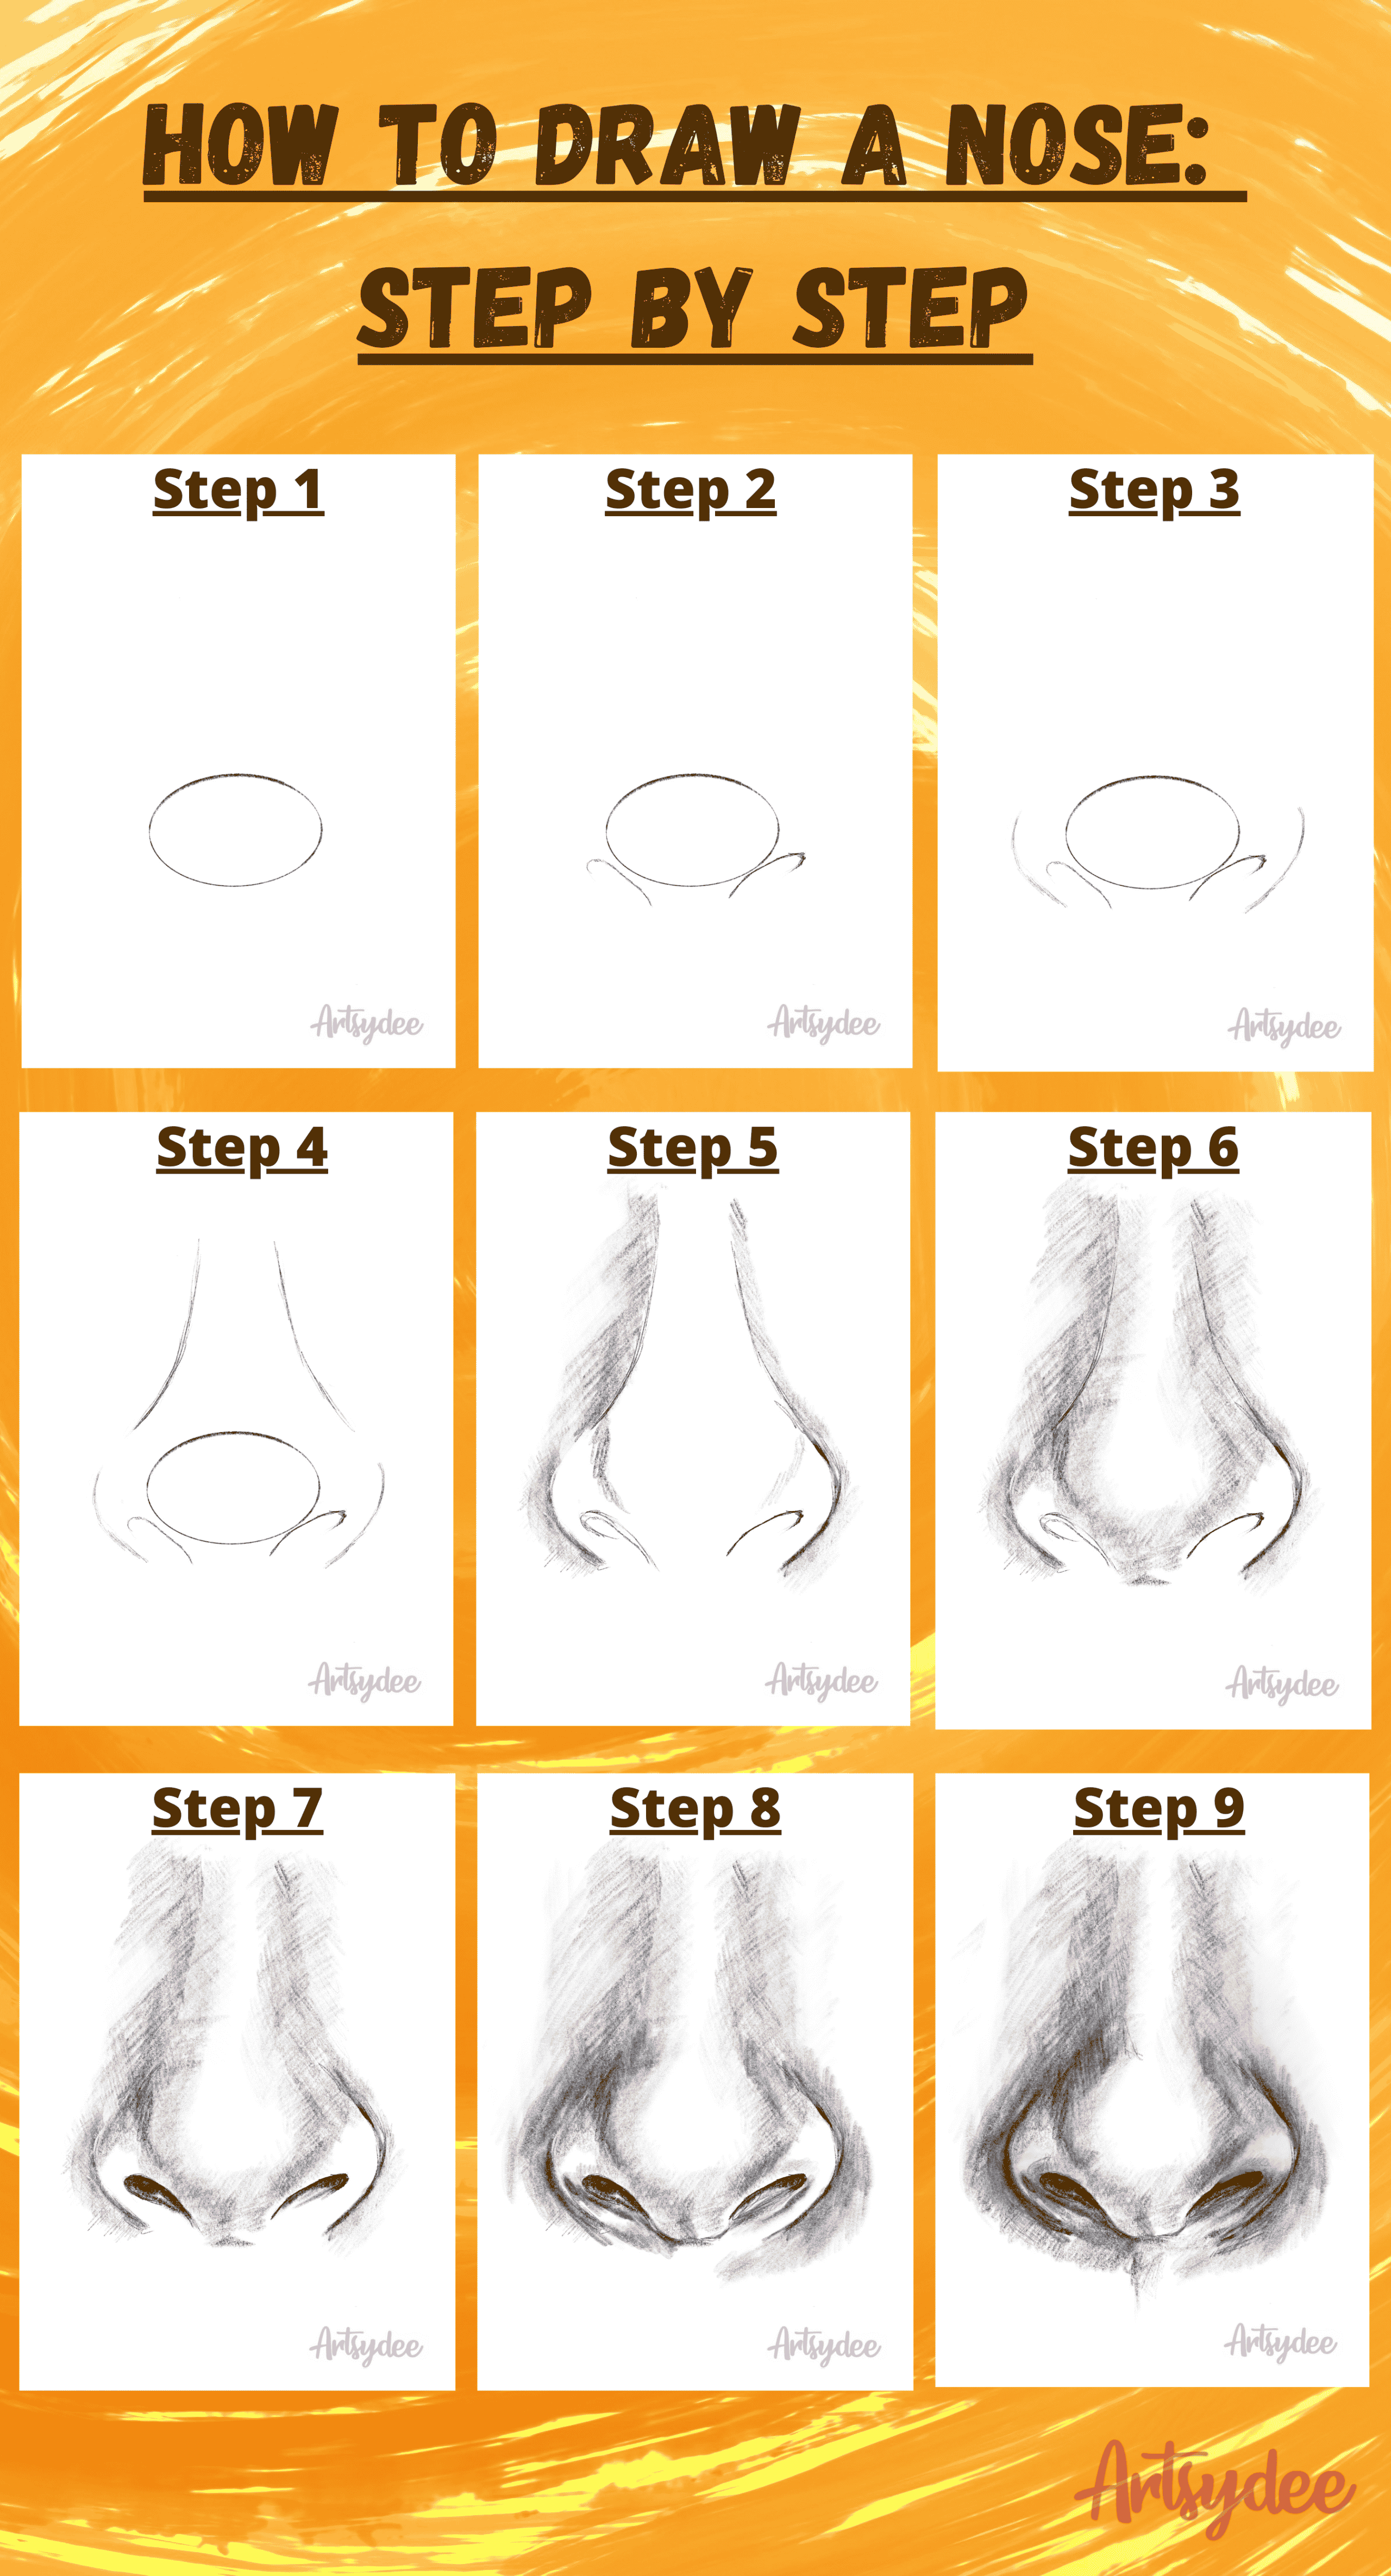 How to Draw a Nose Step by Step infographic